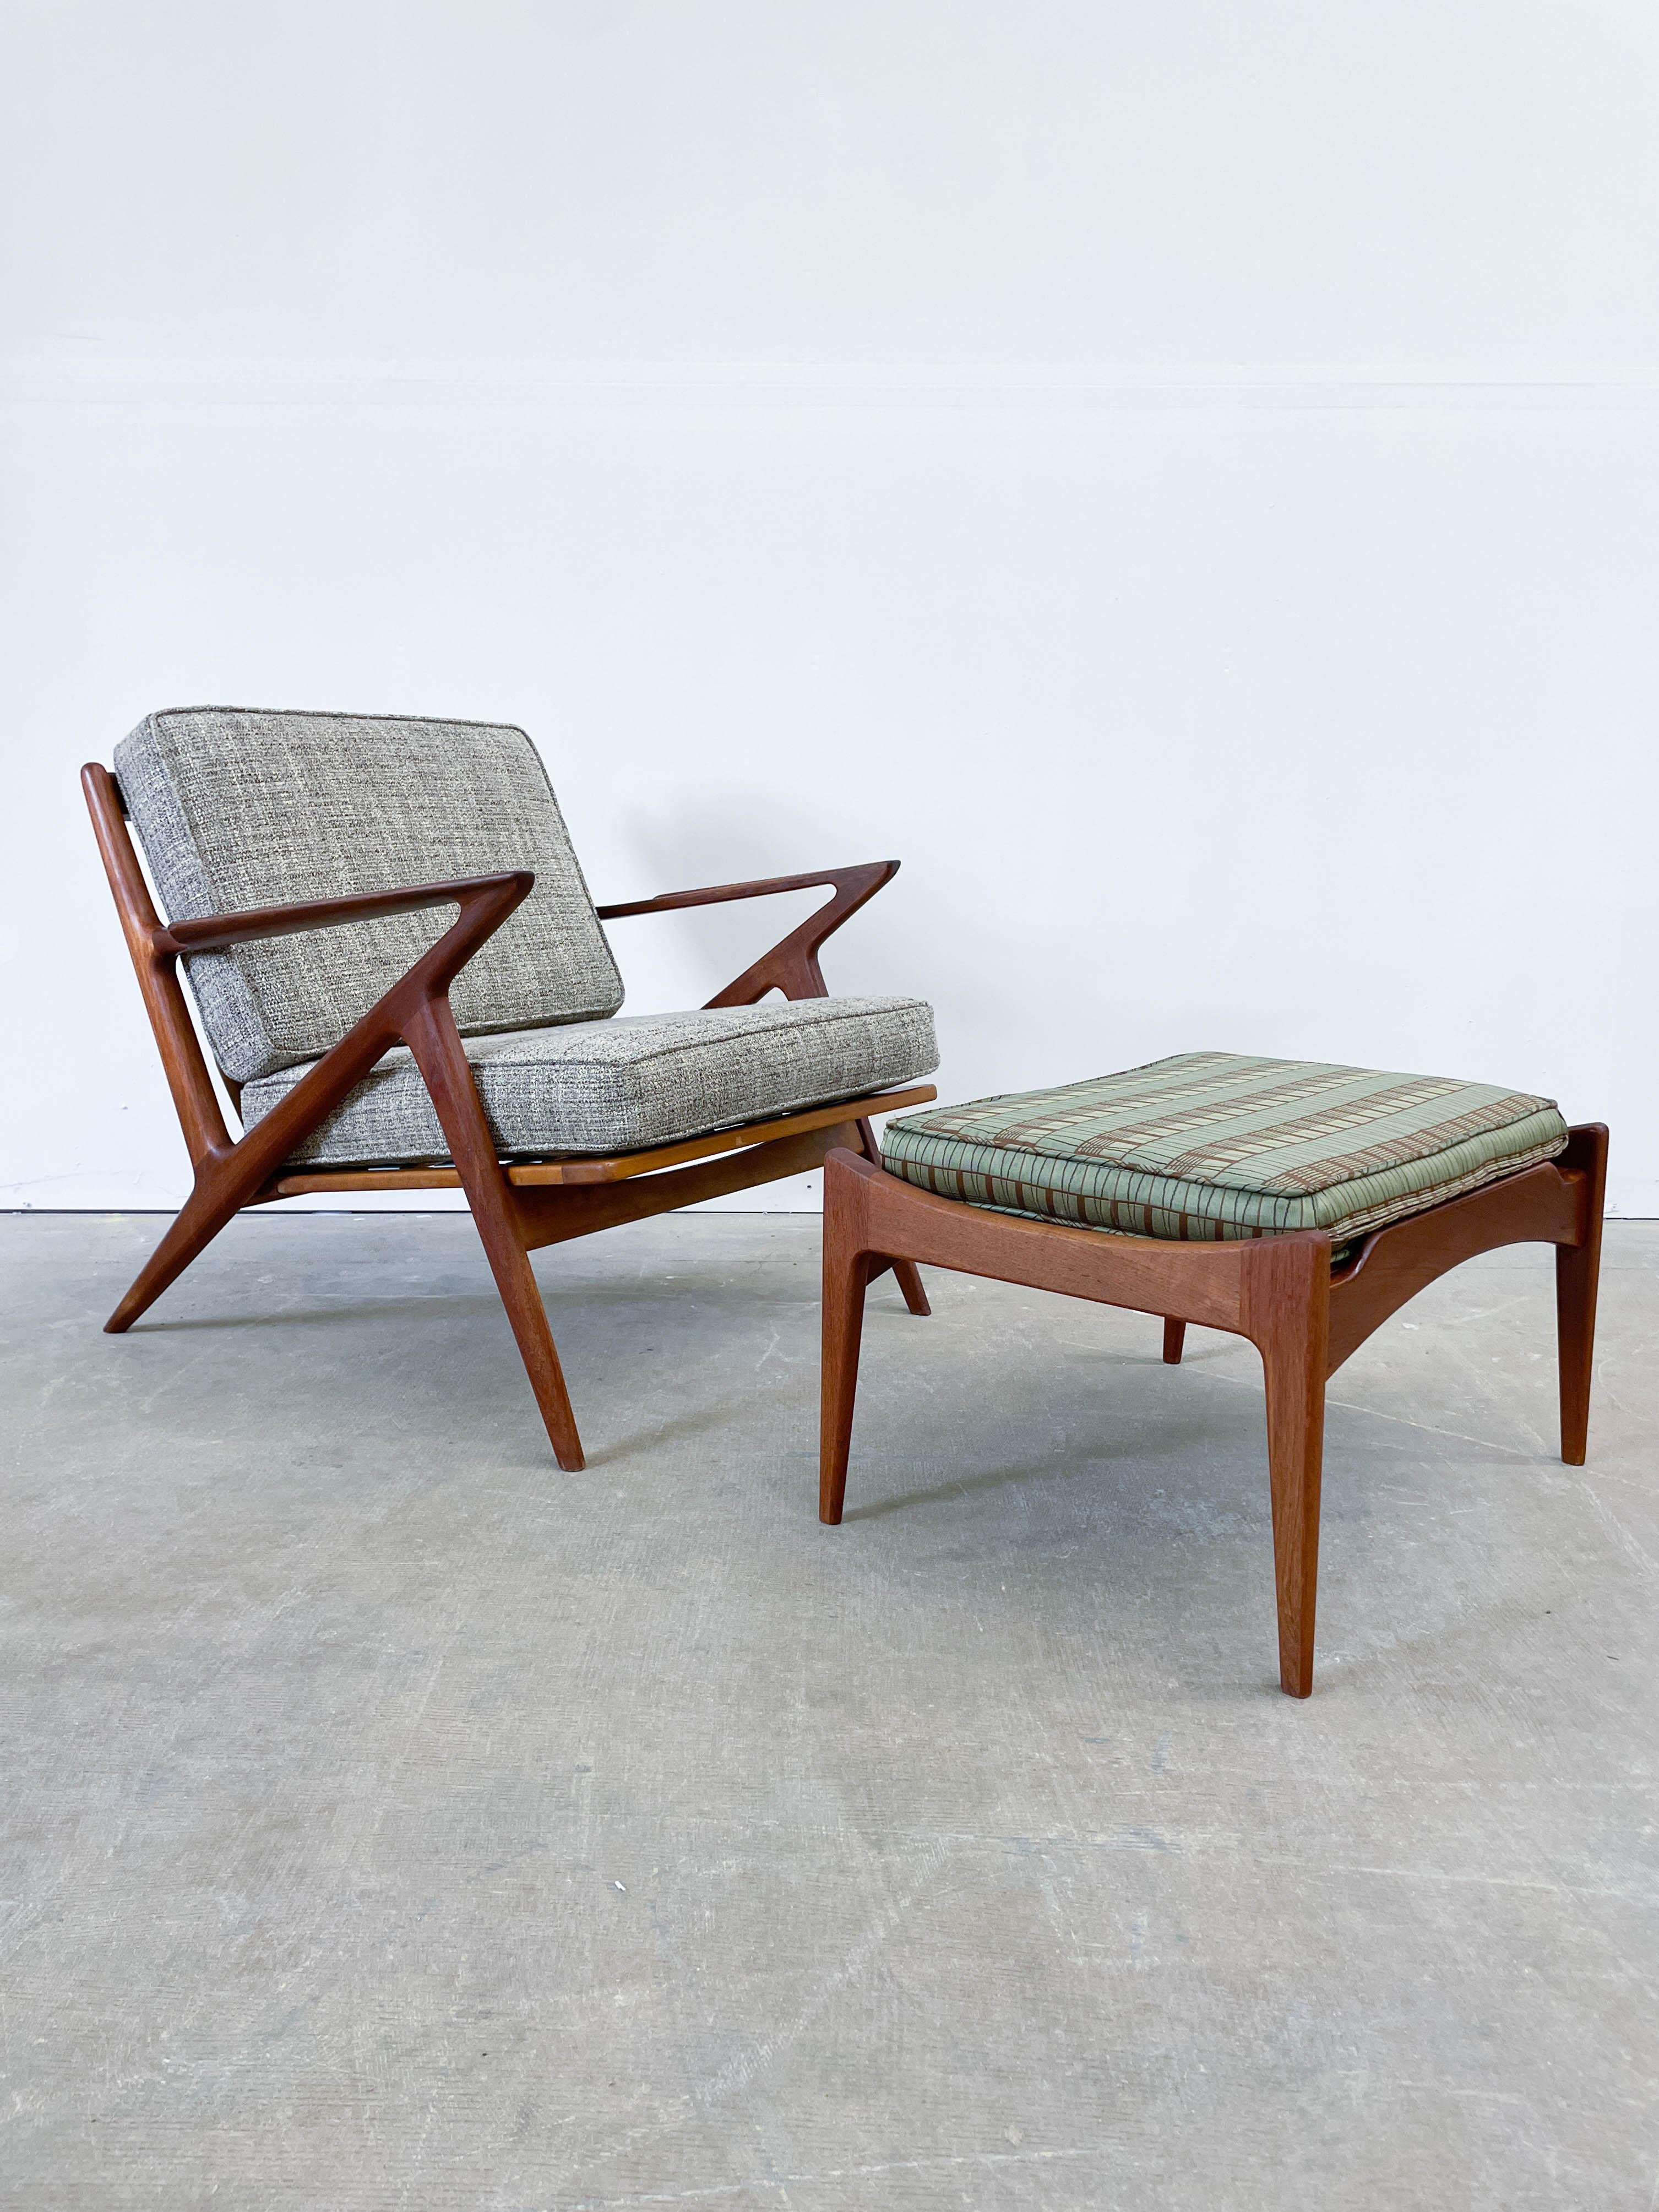 The sleek, classic lines of this iconic Danish chair from the late 1950s are instantly recognizable. Designed by Poul Jensen for Selig, this rare Z-Chair and ottoman are both crafted from teak, a luxurious alternative to the more common Z-Chairs